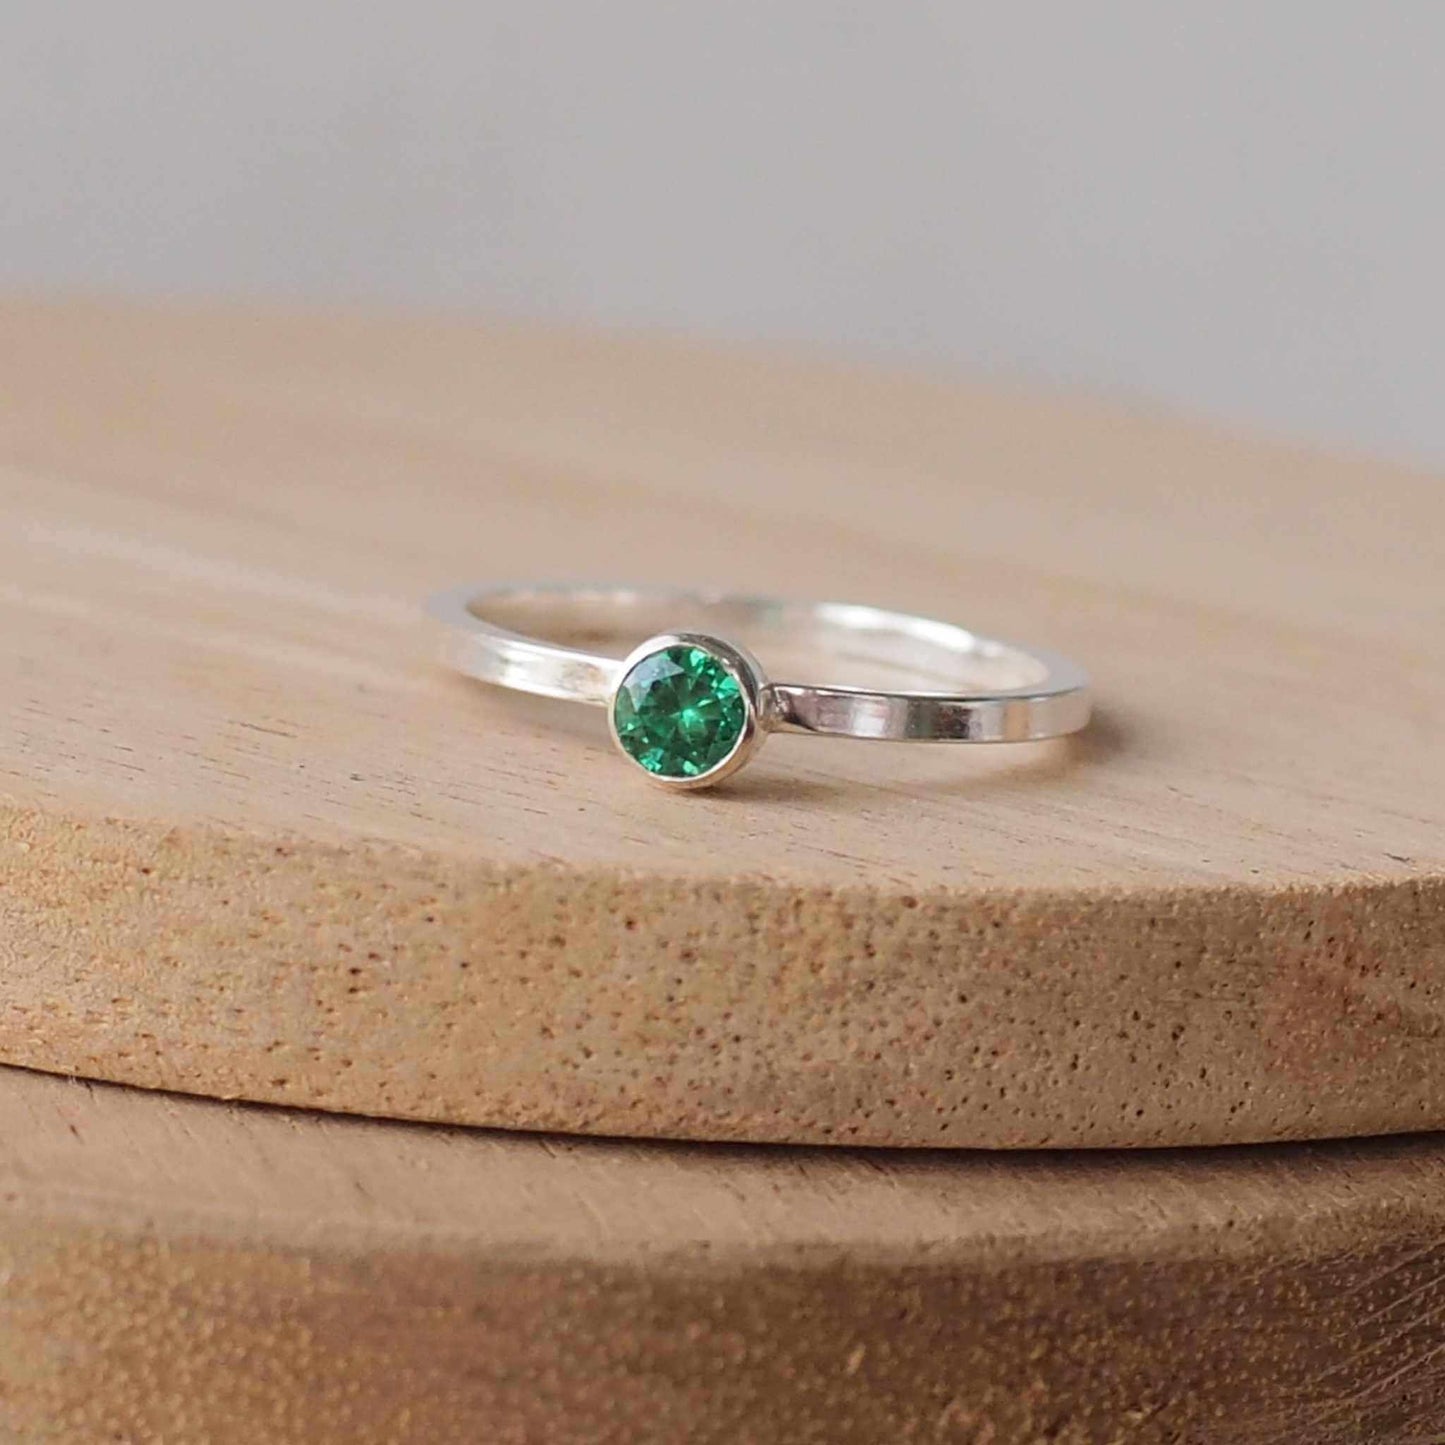 Silver ring with a Green gemstone. The ring is simple in style with no embellishment , with a round wire band 1.5mm thick with a simple Green Emerald 4mm round cubic zirconia stone set in an enclosed silver setting. Emerald is birthstone for May. The ring is Sterling Silver and made to your ring size. Handmade in Scotland by Maram Jewellery